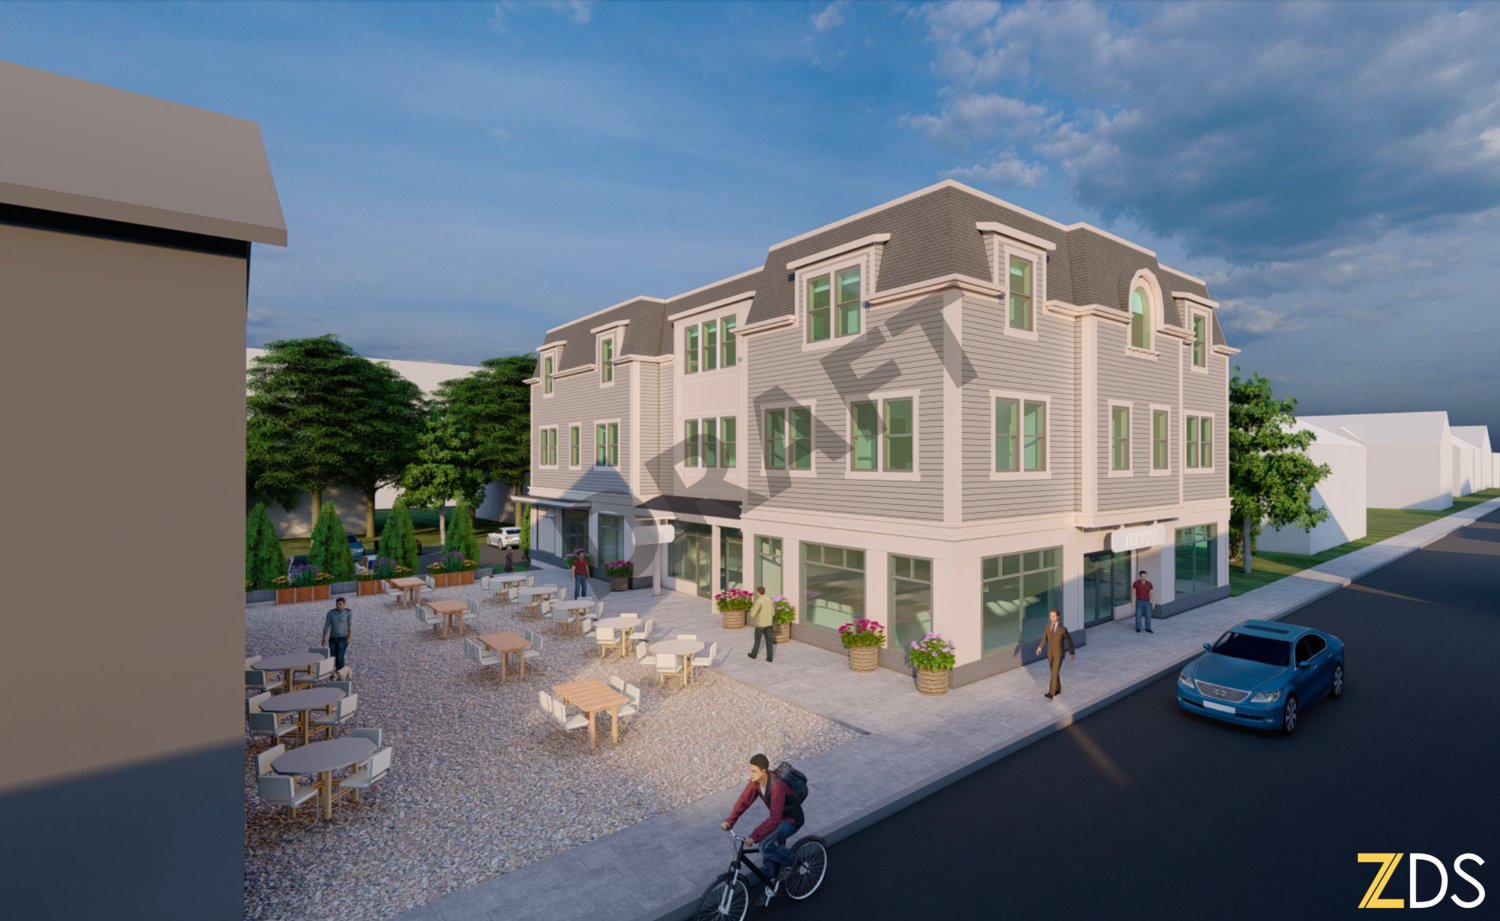 A new draft rendering of the 119 Water St. project shows a three-story building of smaller scale than the originally proposed building, which was four stories and over 50 feet tall at its highest point.